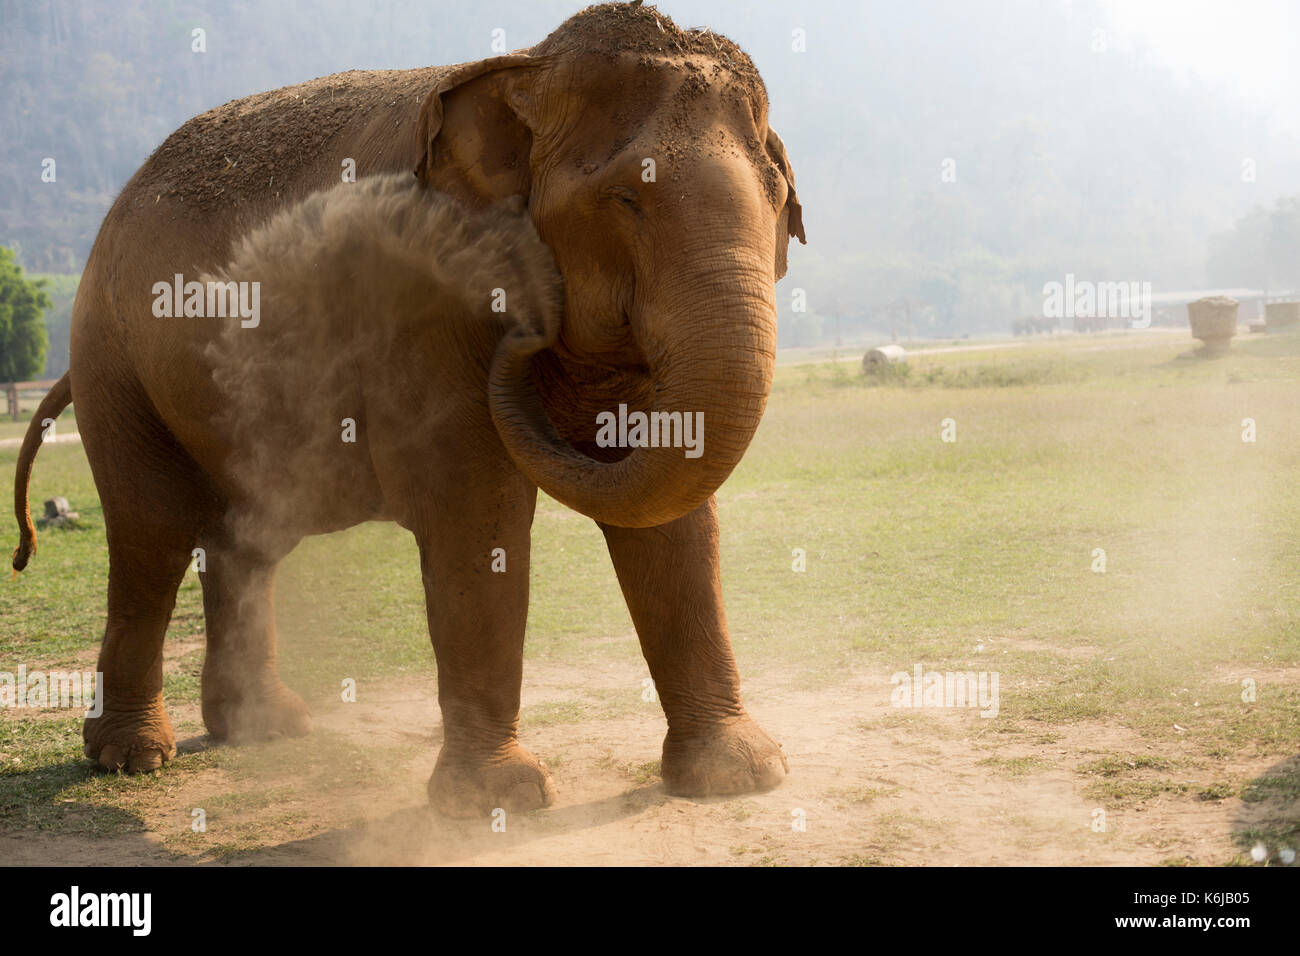 Front view of elephant throwing dust, Chiang Mai, Thailand Stock Photo